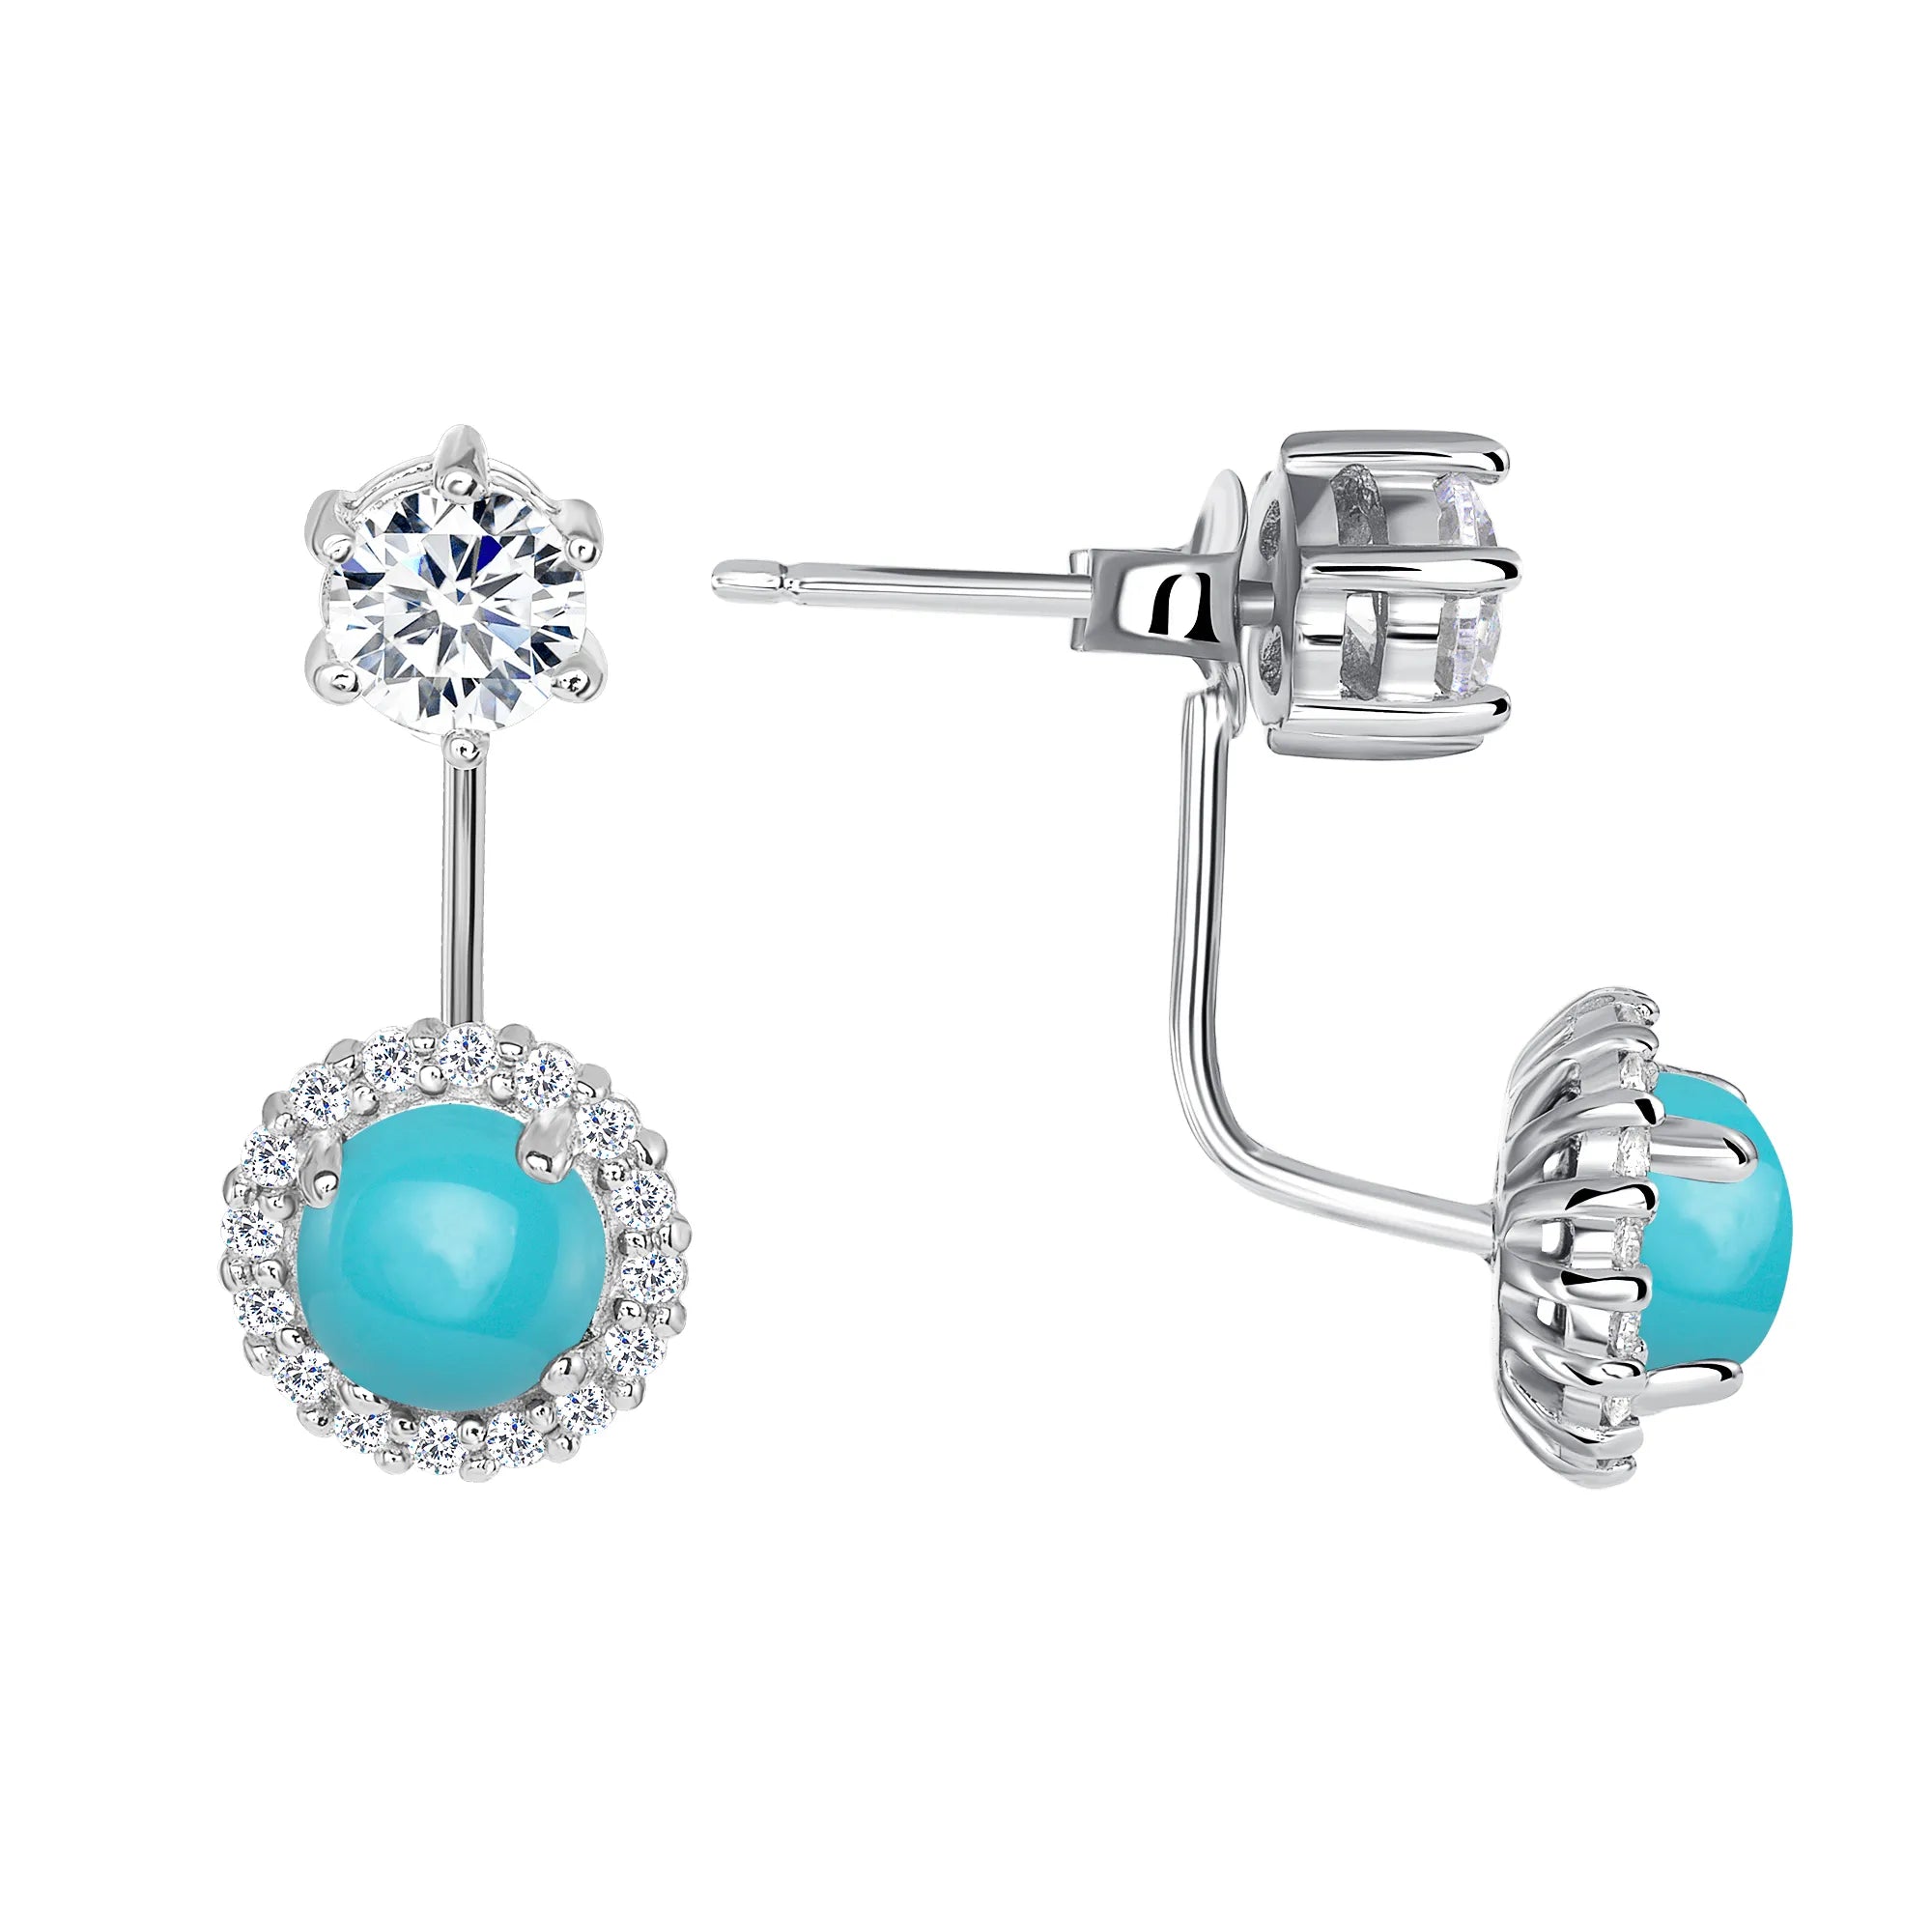 925 Sterling Silver Halo Round Gemstone and CZ Jacket Earrings